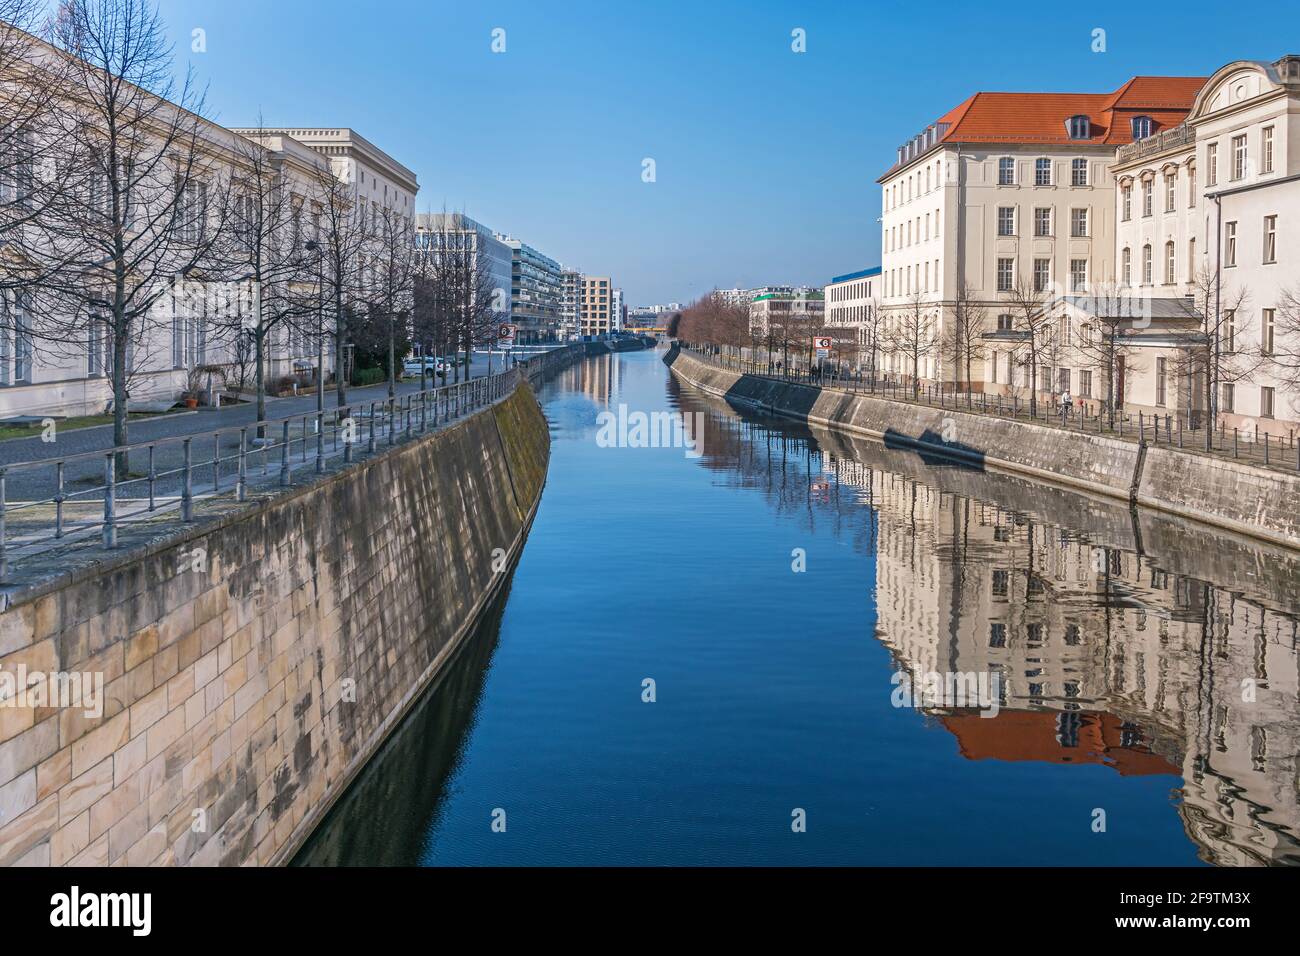 Berlin, Germany - March 1, 2021: Banks of the Berlin-Spandau shipping canal with the building of Hamburger Bahnhof and Federal Ministry for Economic A Stock Photo